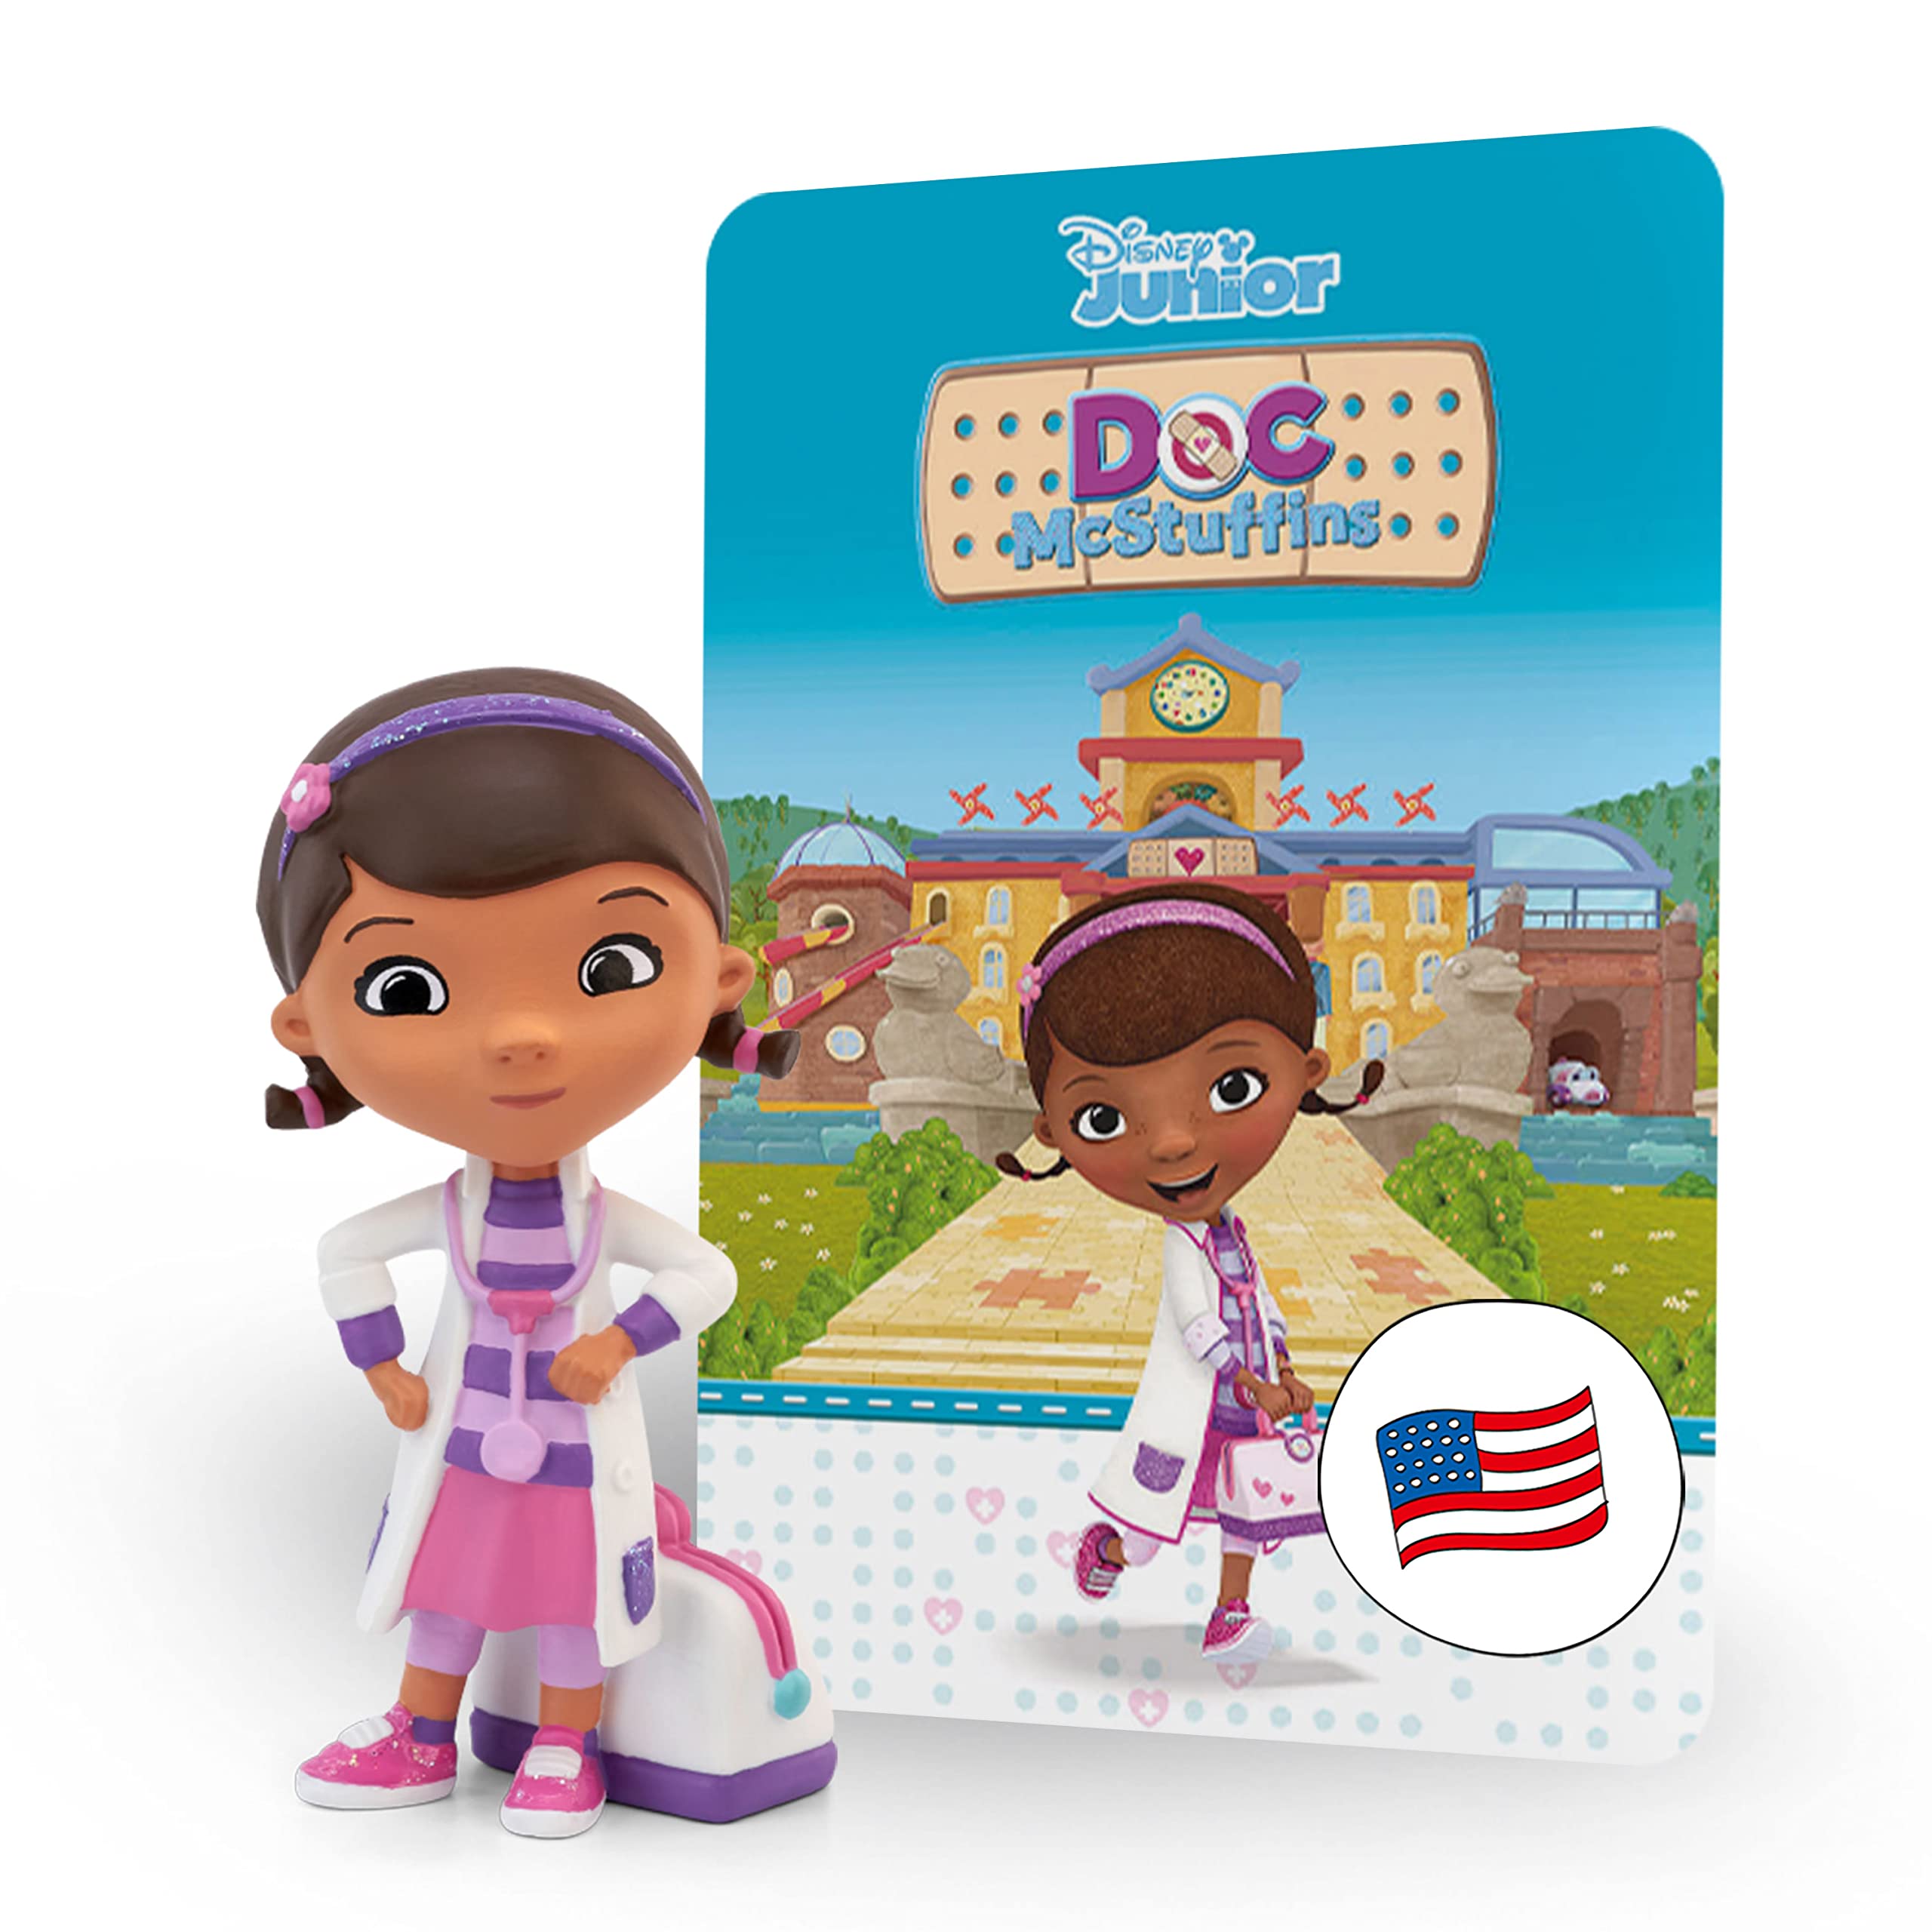 Tonies Doc McStuffins Audio Play character from Disney